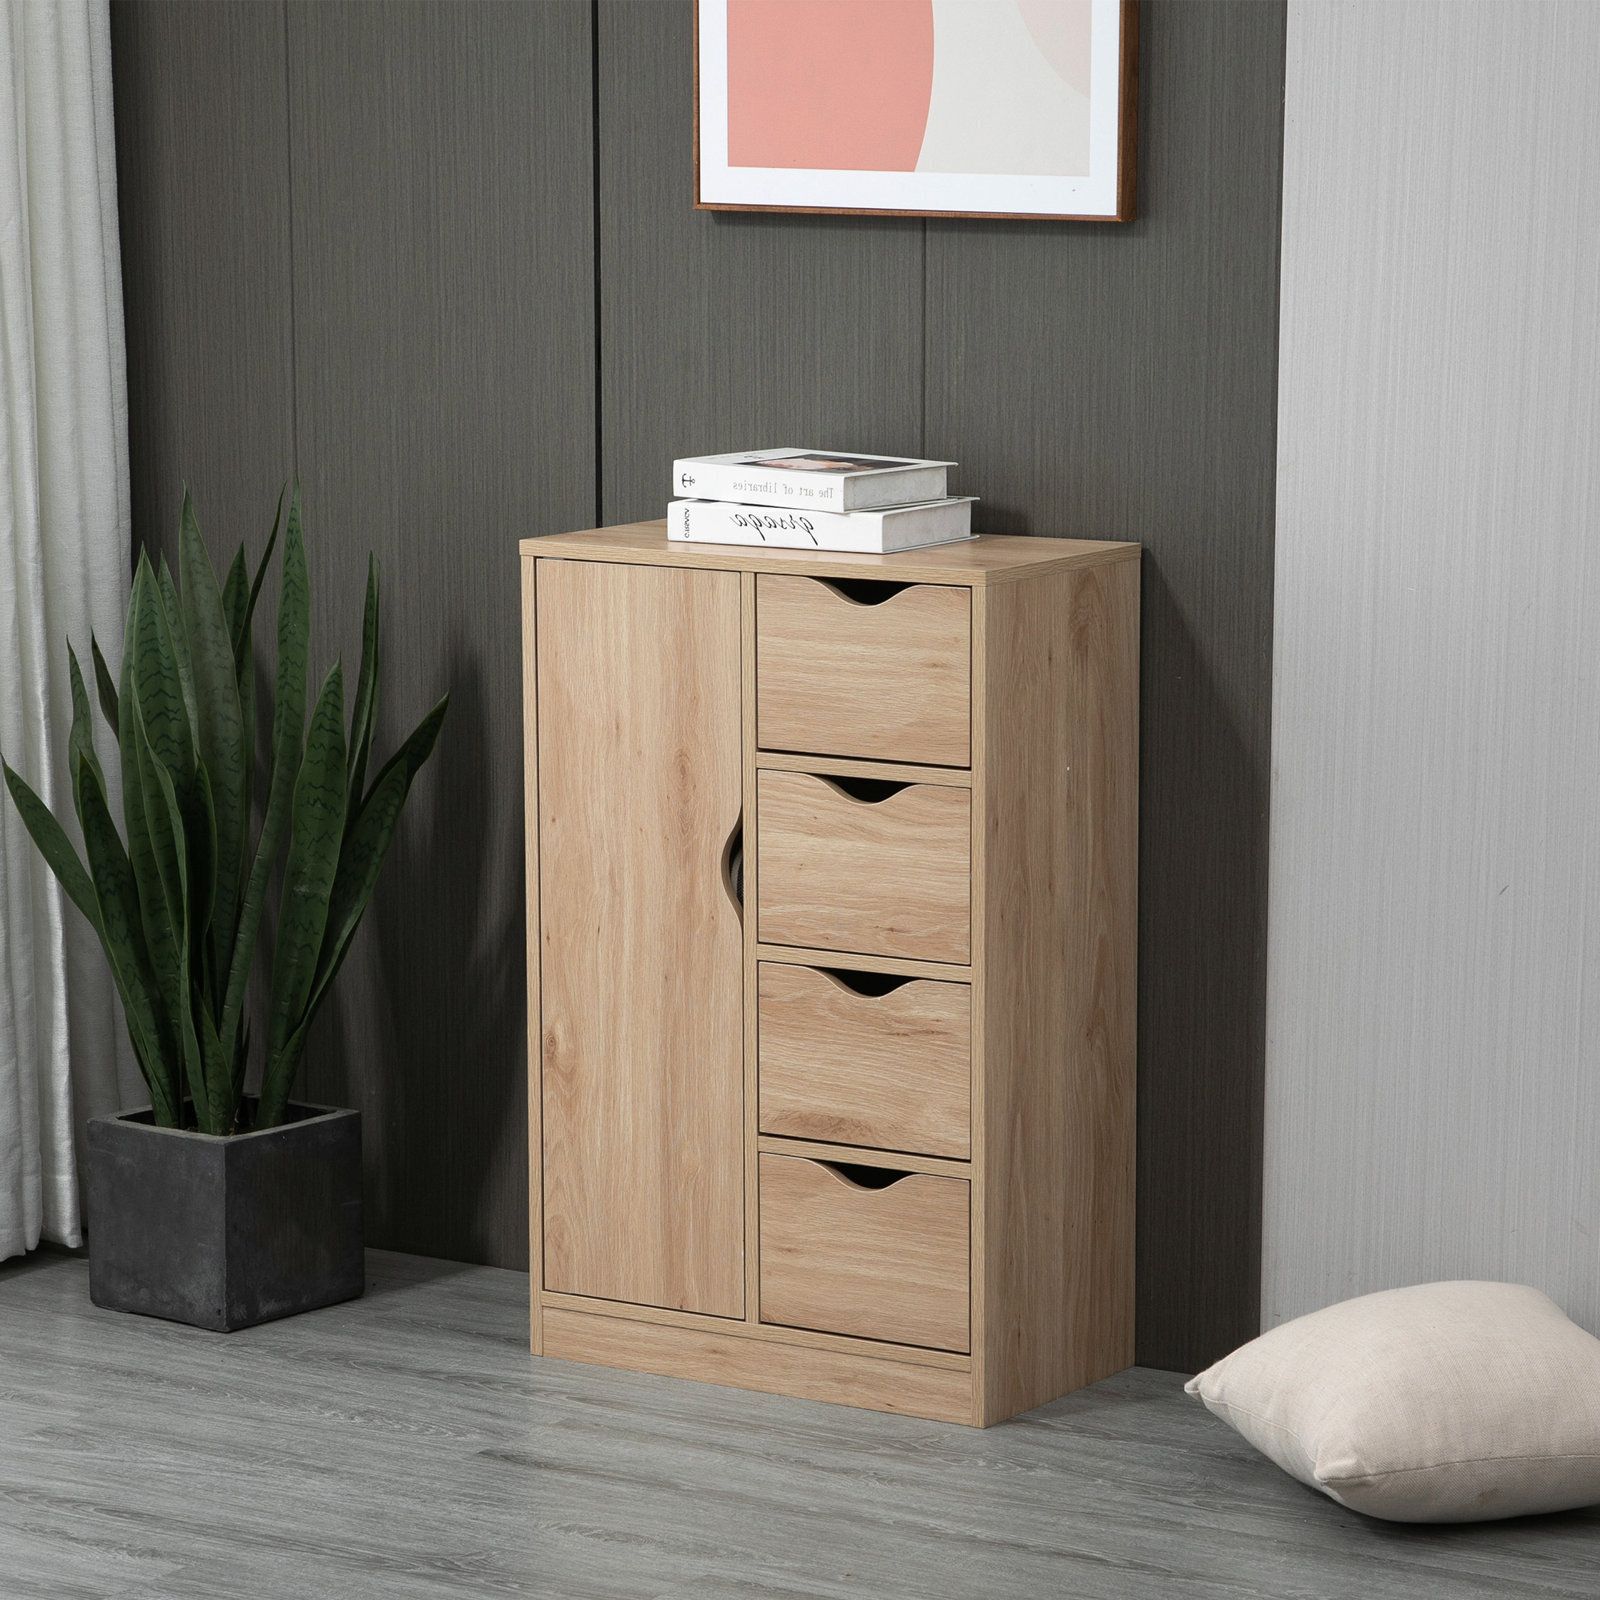 Small Wooden Cabinet With Drawers – Foter With Regard To Wood Cabinet With Drawers (Gallery 7 of 20)